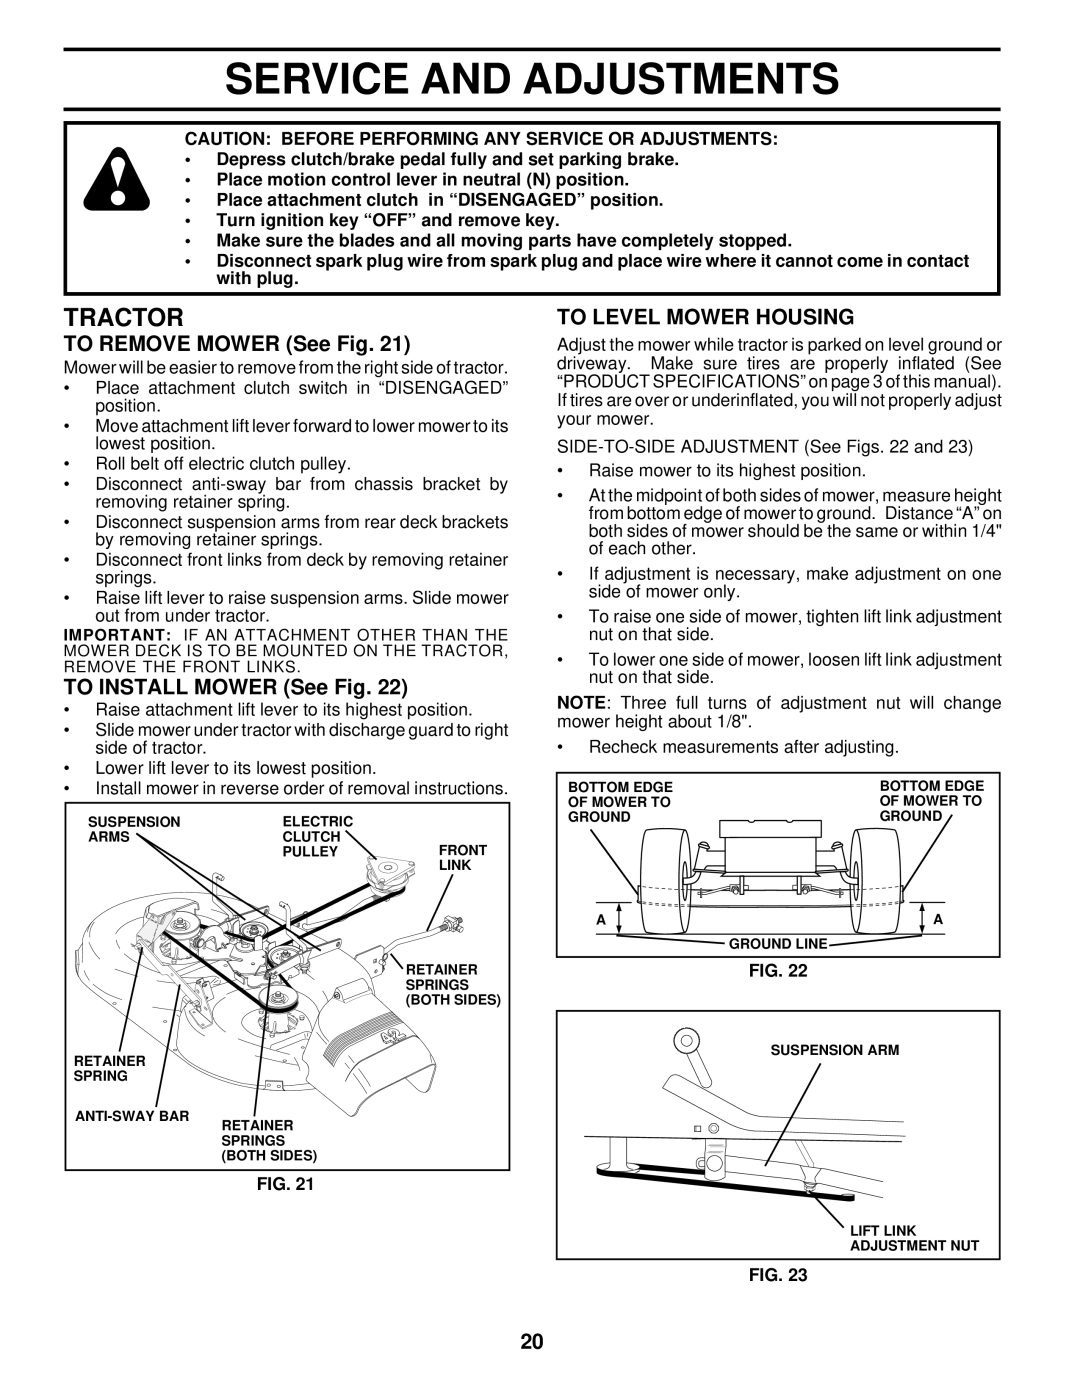 Husqvarna LTH130 owner manual Service And Adjustments, Tractor, TO REMOVE MOWER See Fig, TO INSTALL MOWER See Fig 